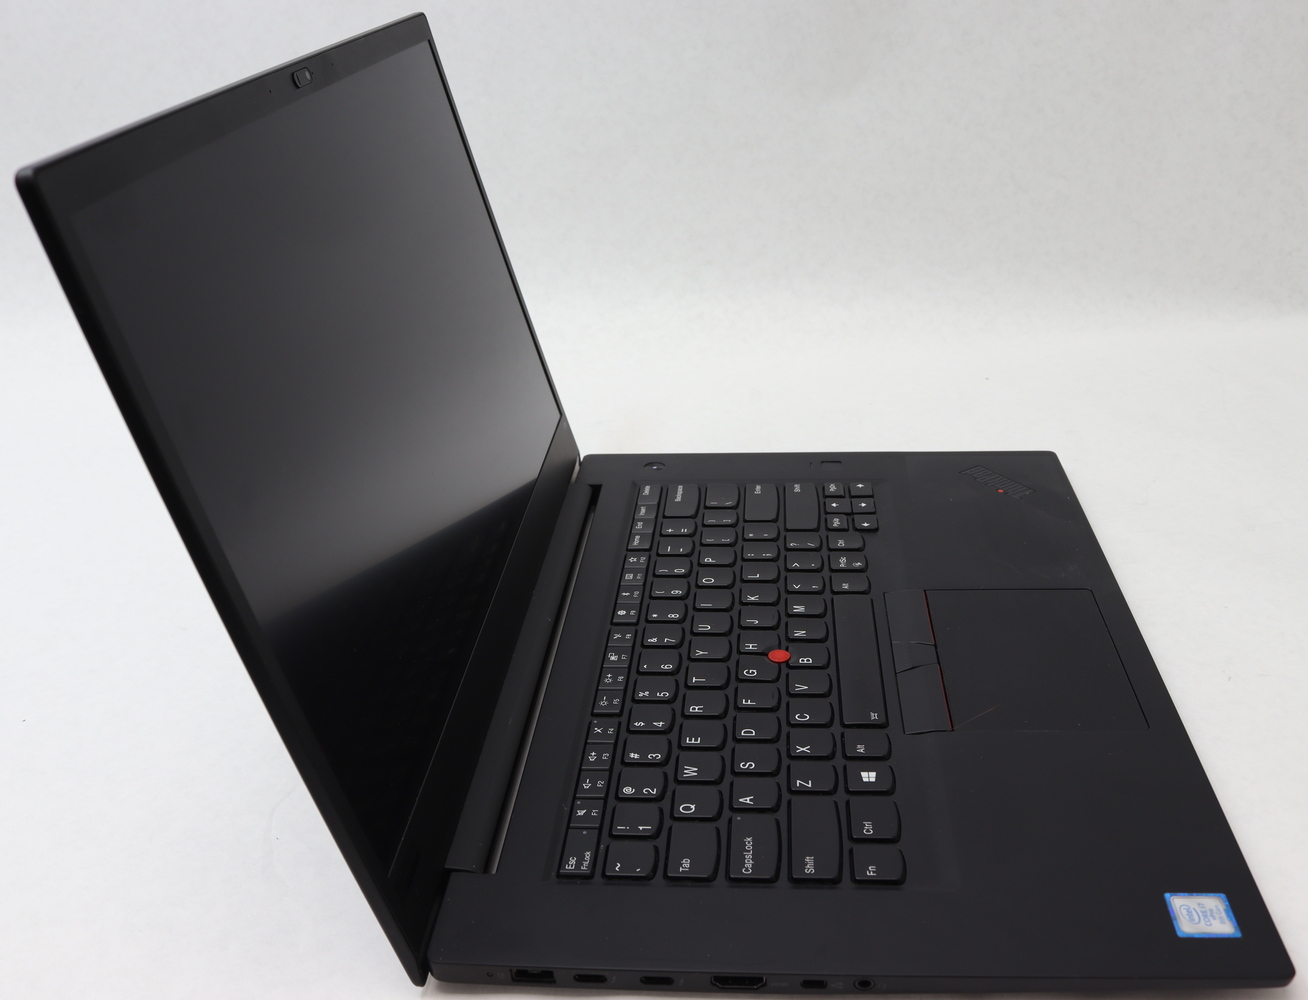 lenovo thinkpad p1 windows 10 pro, 2.6-0 ghz, i7, 32.0gm with charger